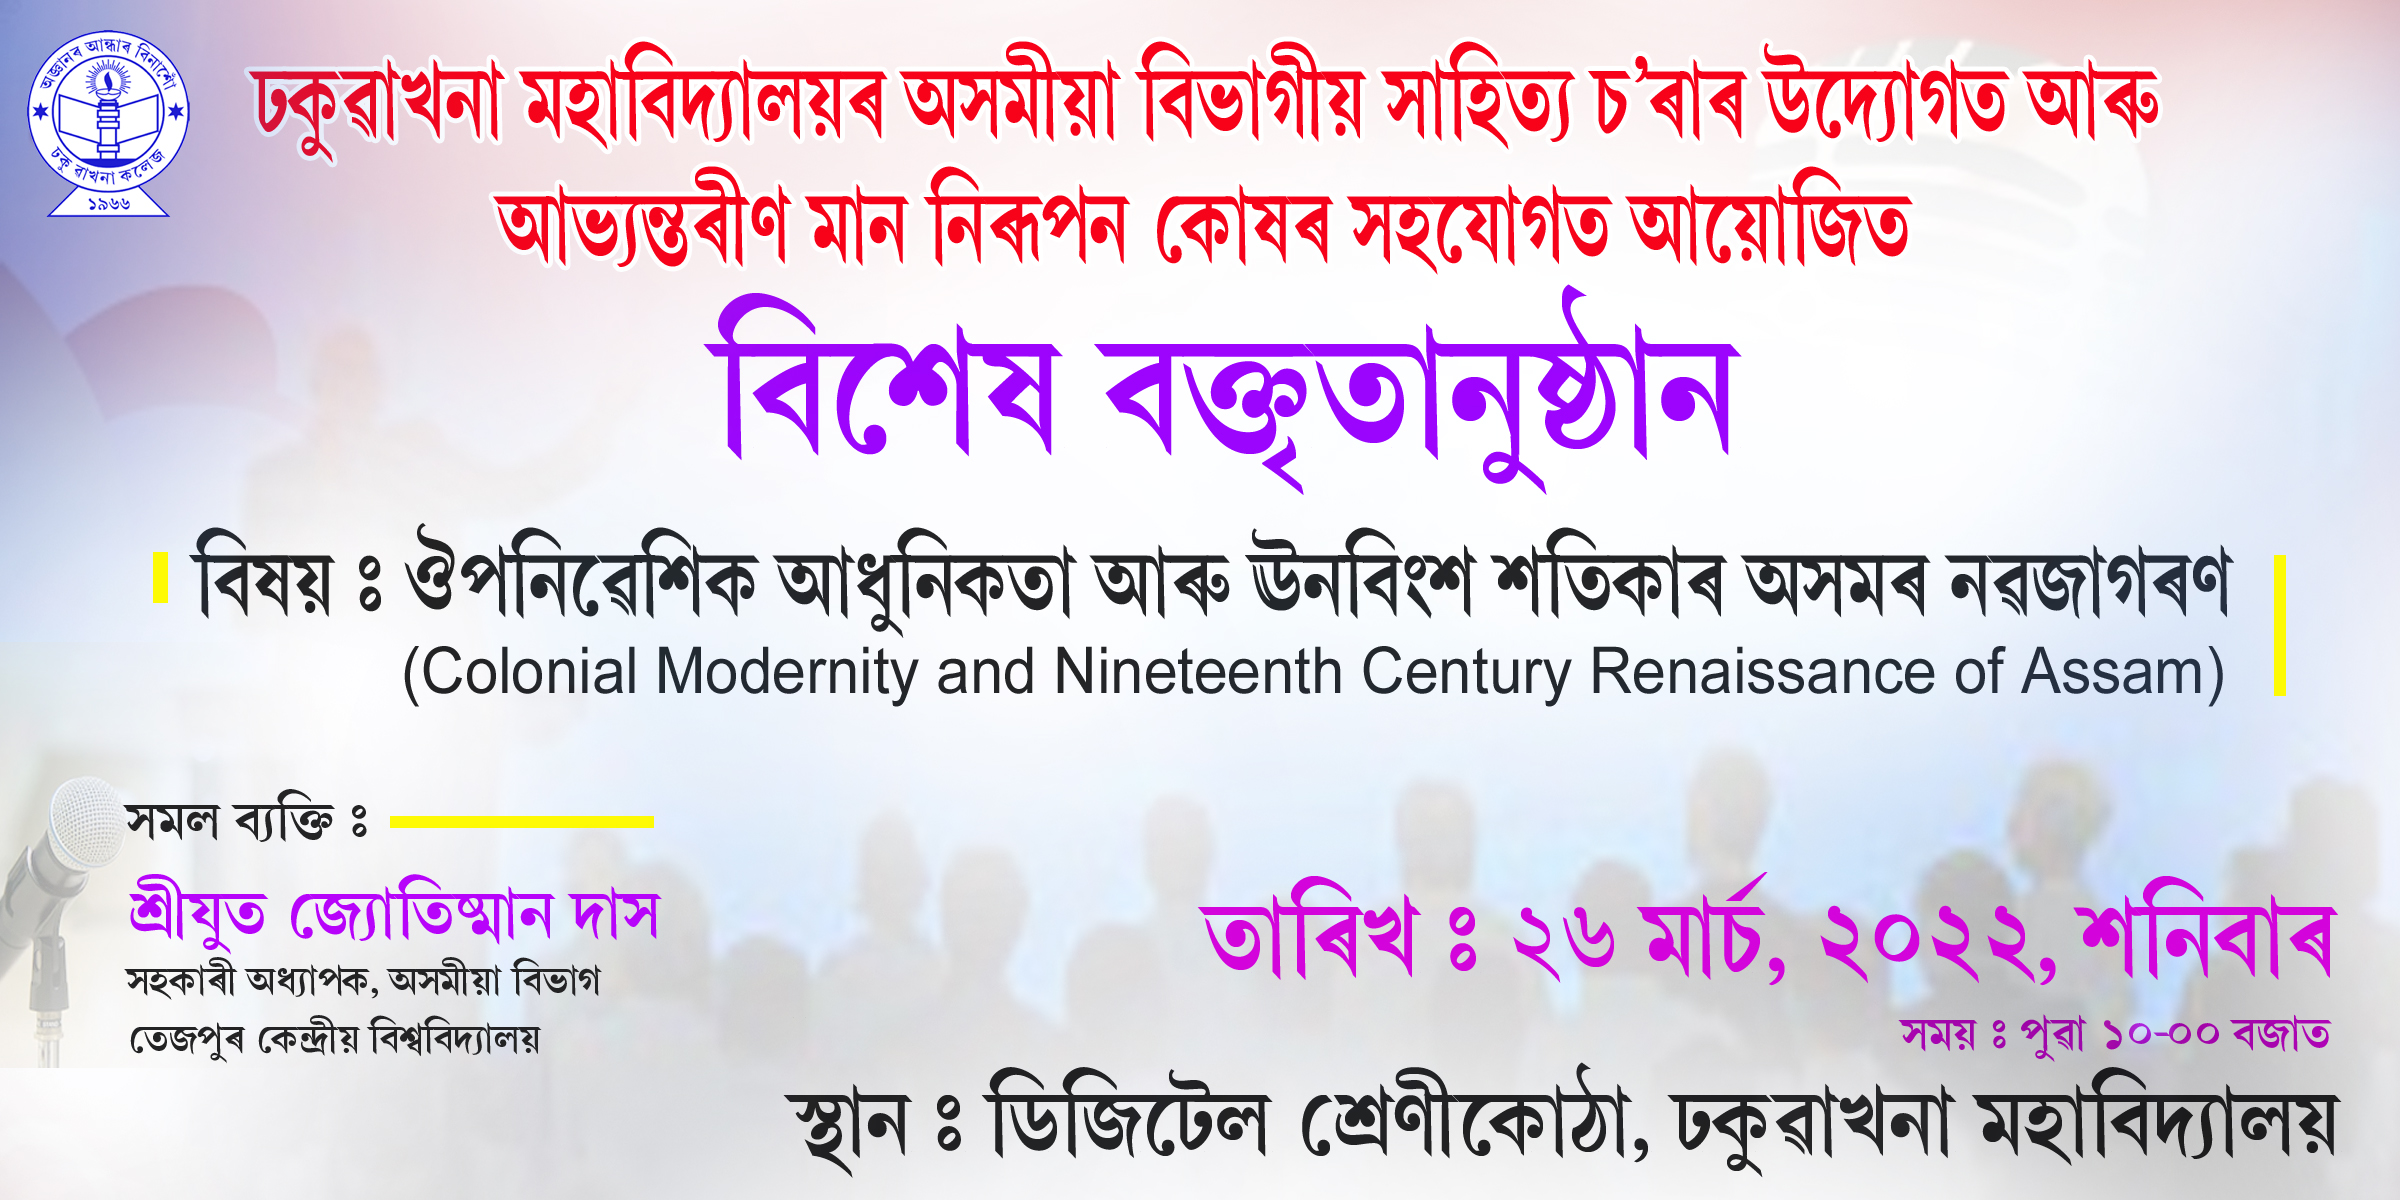 Special Talk on Colonial Modernity and 19th Century Renaissance of Assam